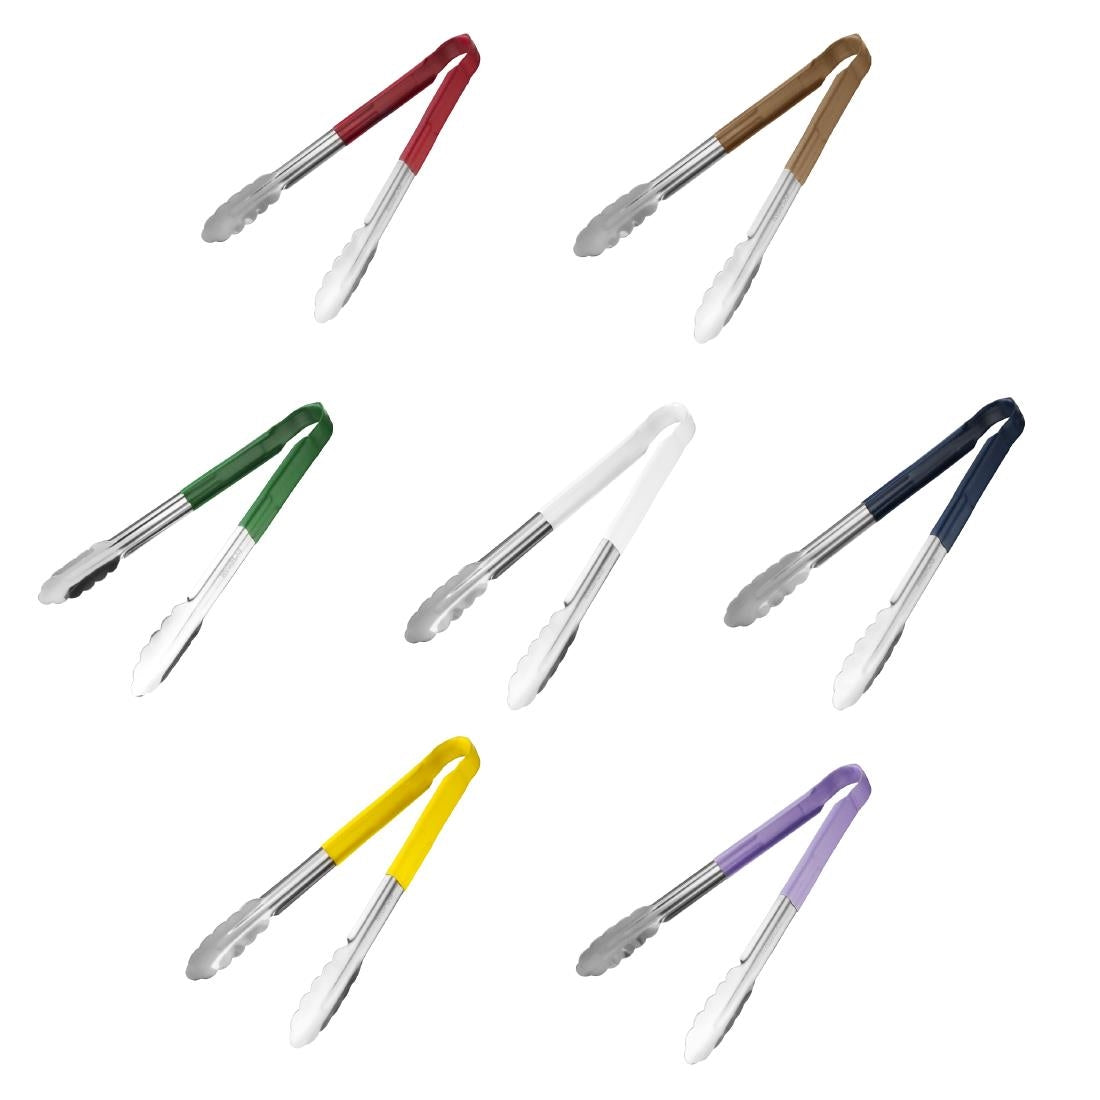 Hygiplas 300mm Colour Coded Tong Set (Pack of 7 Colours)